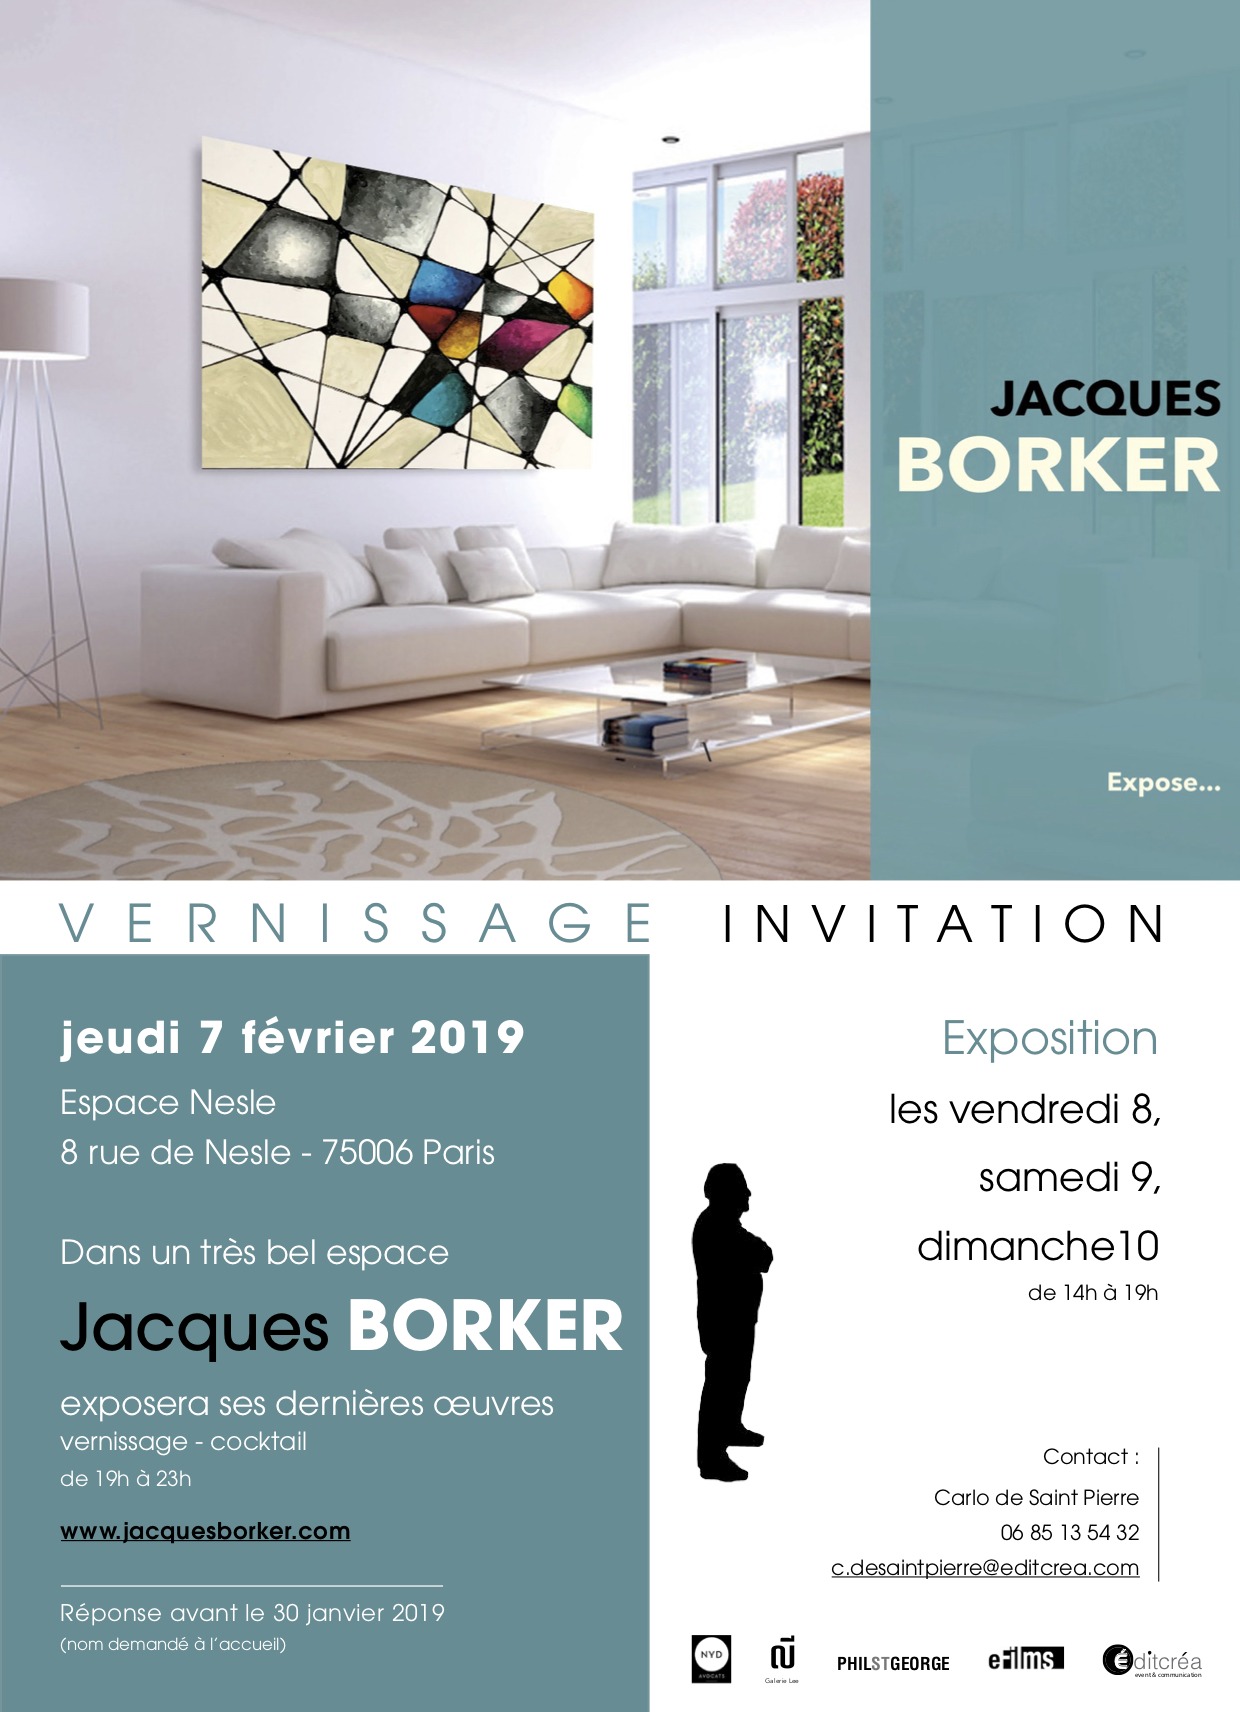 jacques borker exposition - Phil st George music